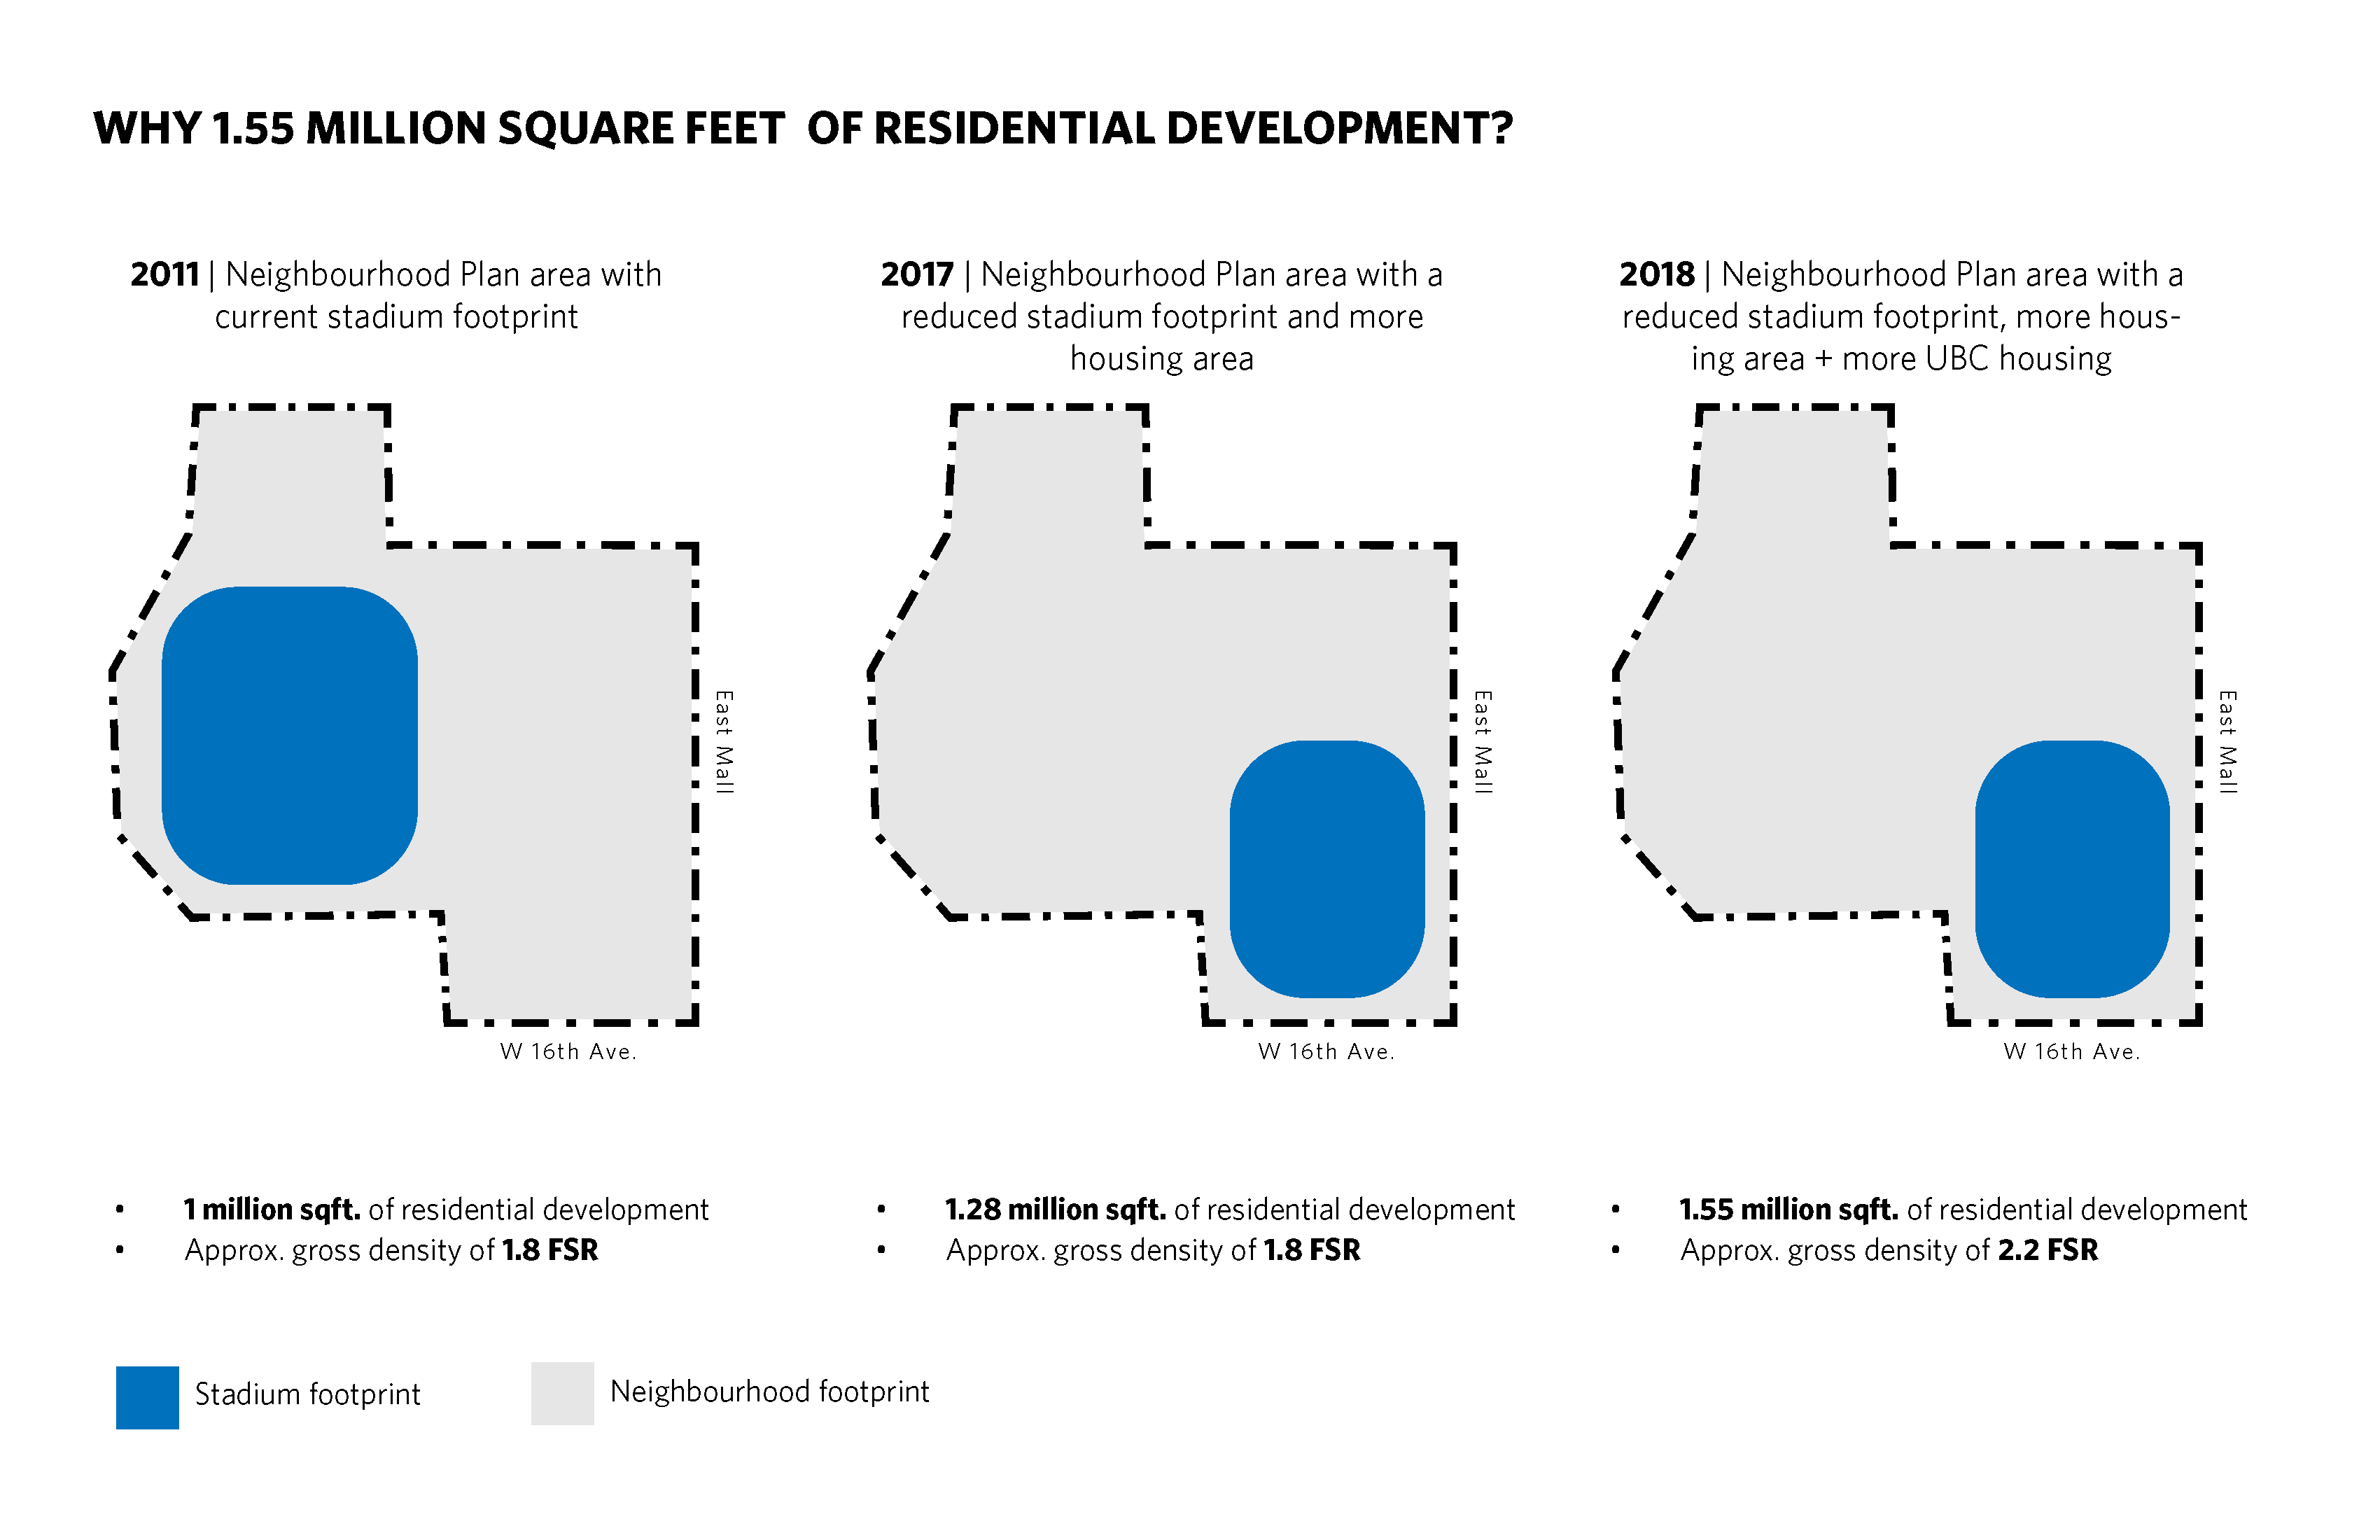 Why 1.55 Million Square Feet of Residential Development?